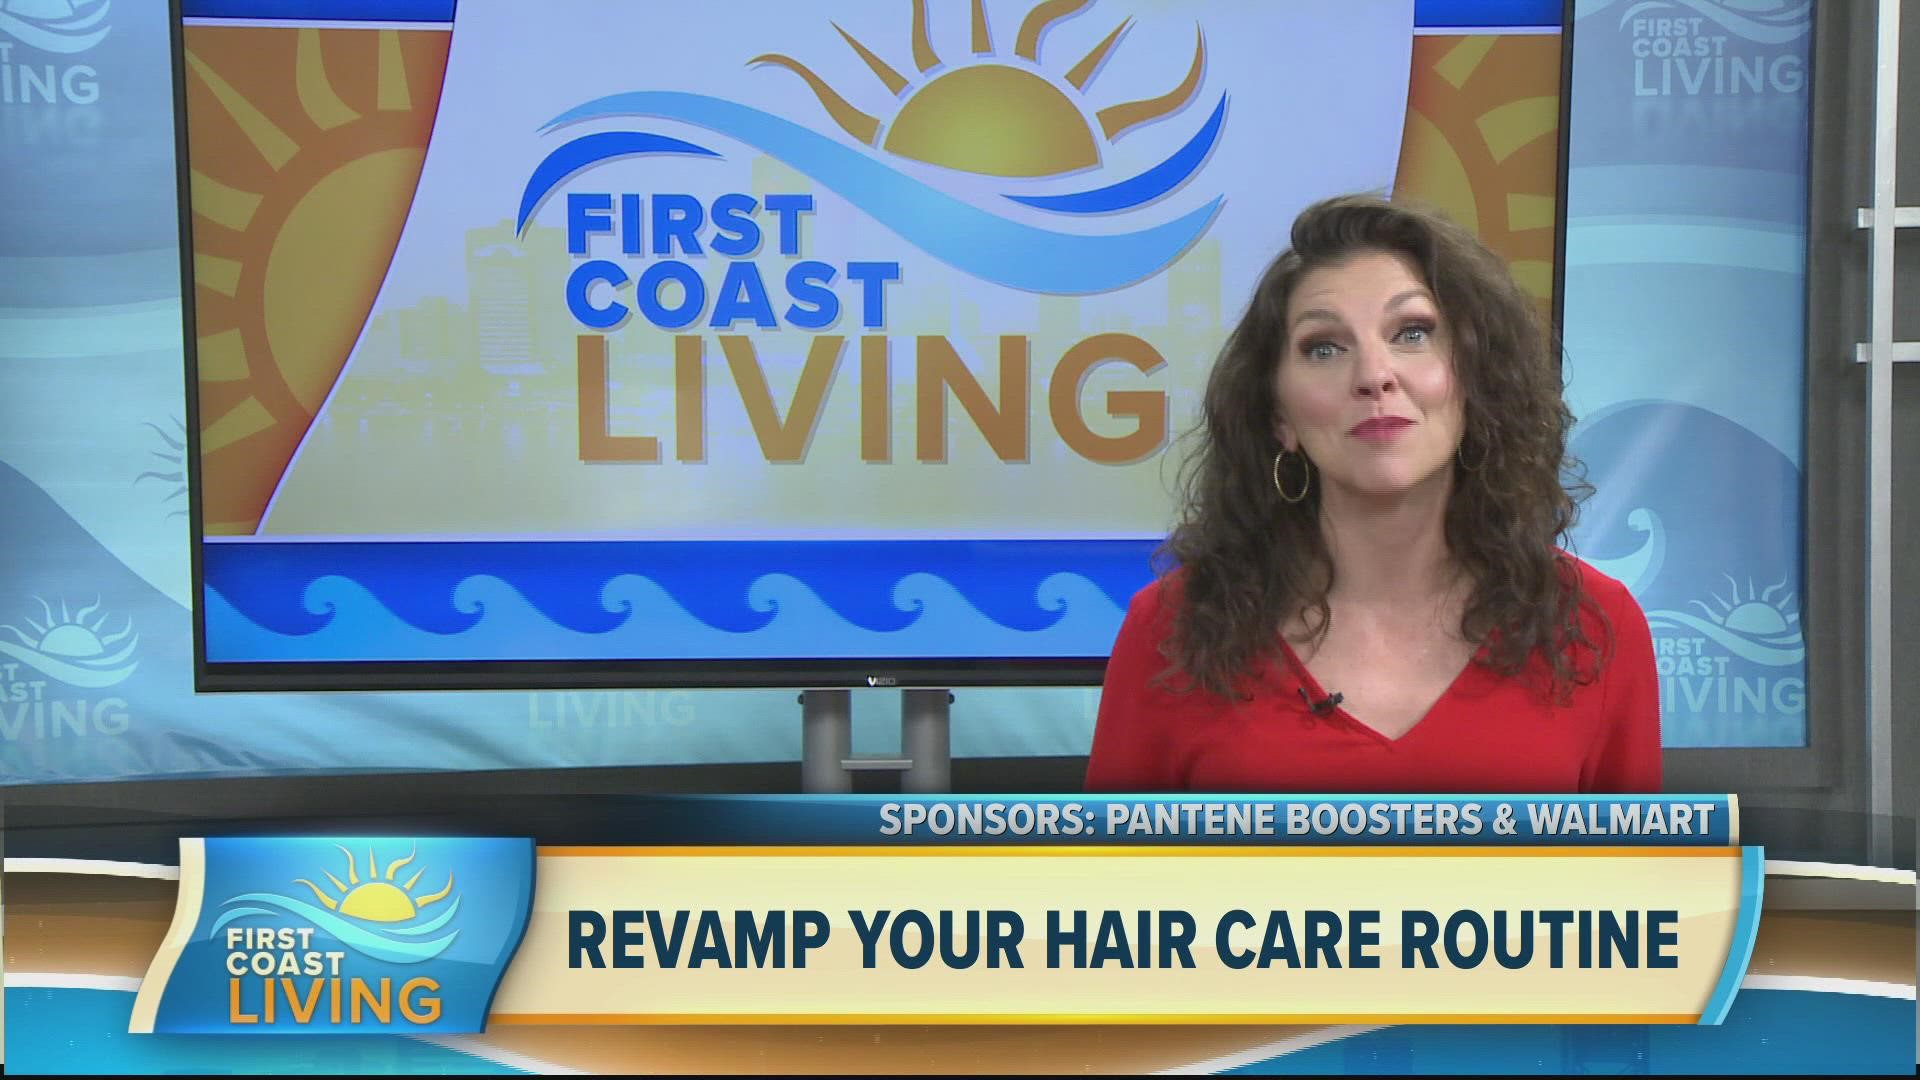 Lifestyle Contributor, Limor Suss shares details on Pantene Boosters which allow you to customize your hair care every time you wash.